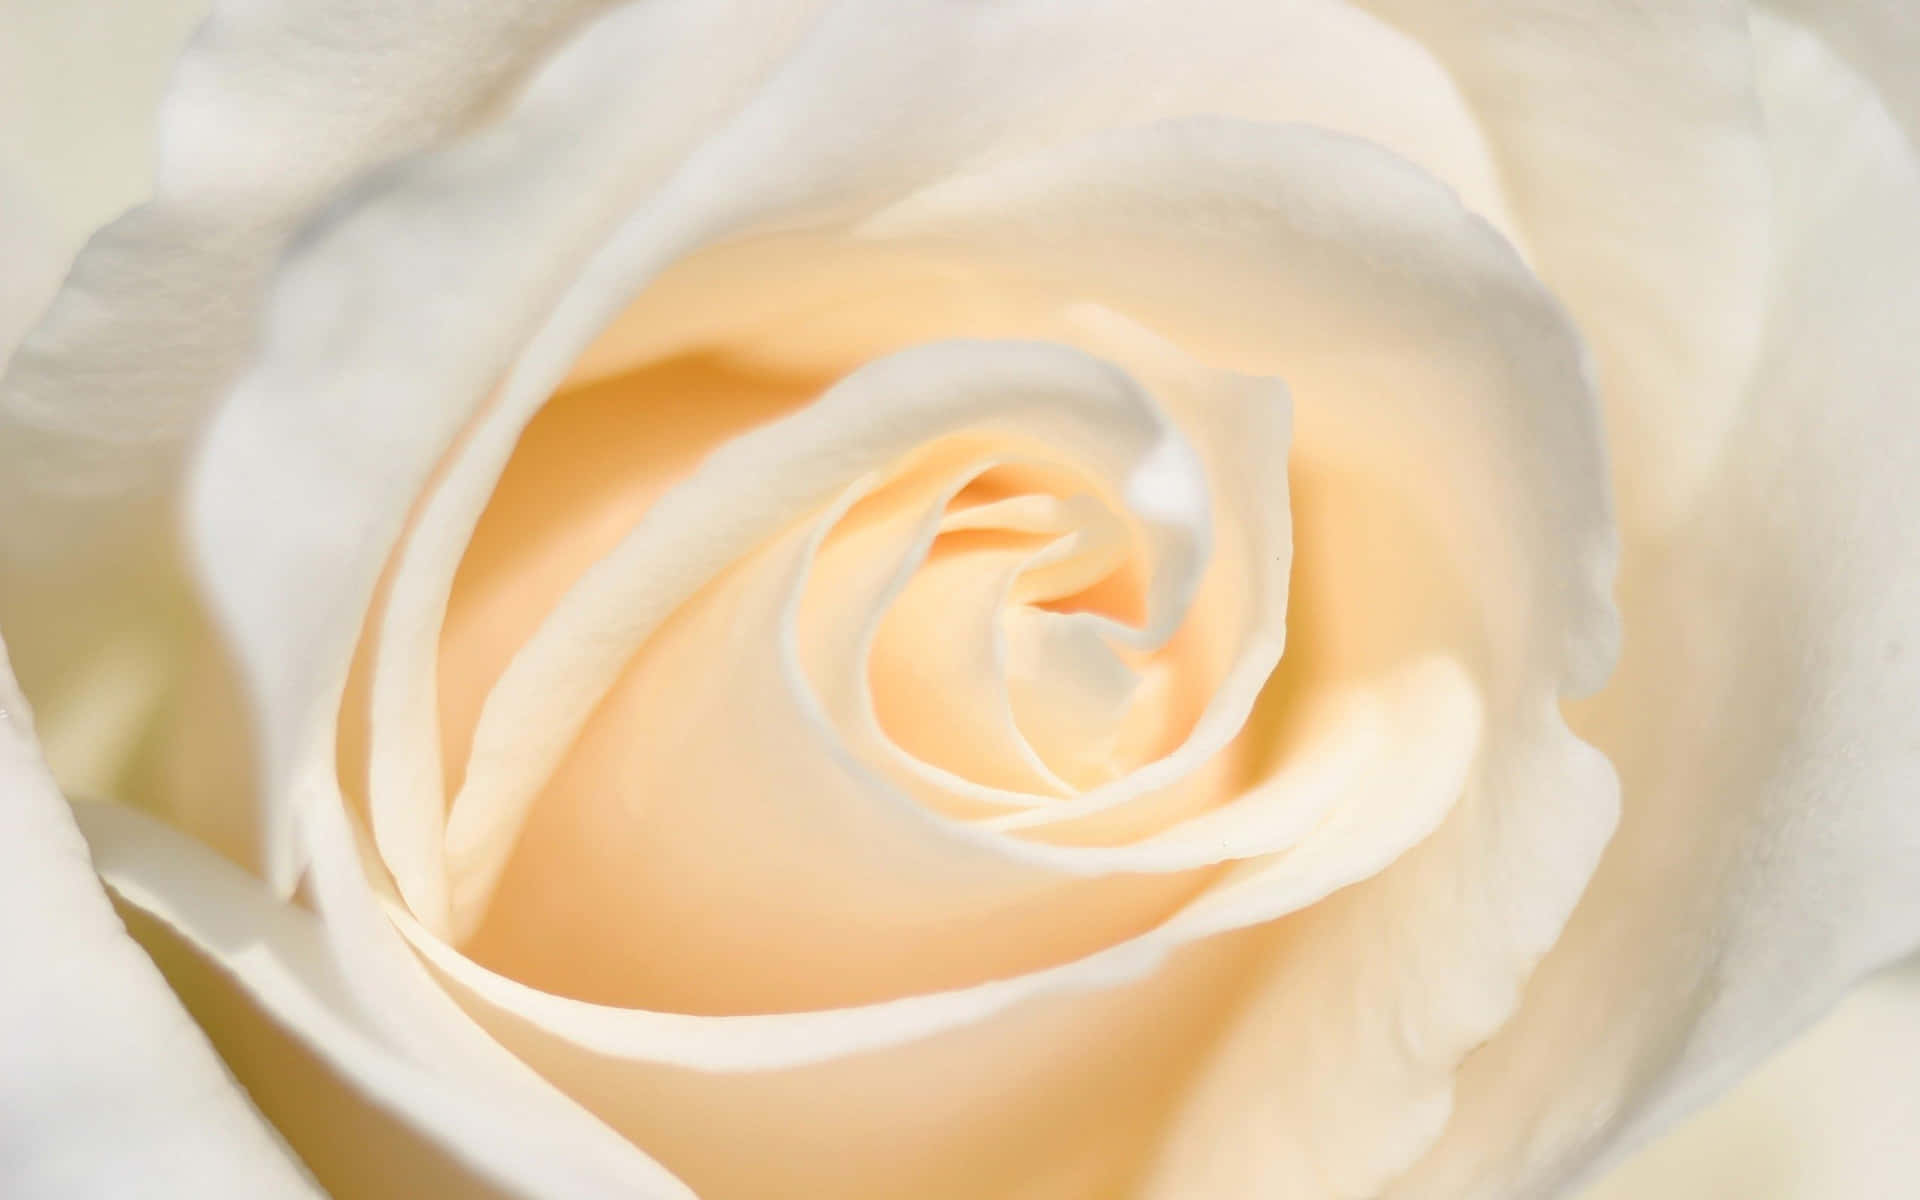 “White Rose: A symbol of Innocence and Purity” Wallpaper